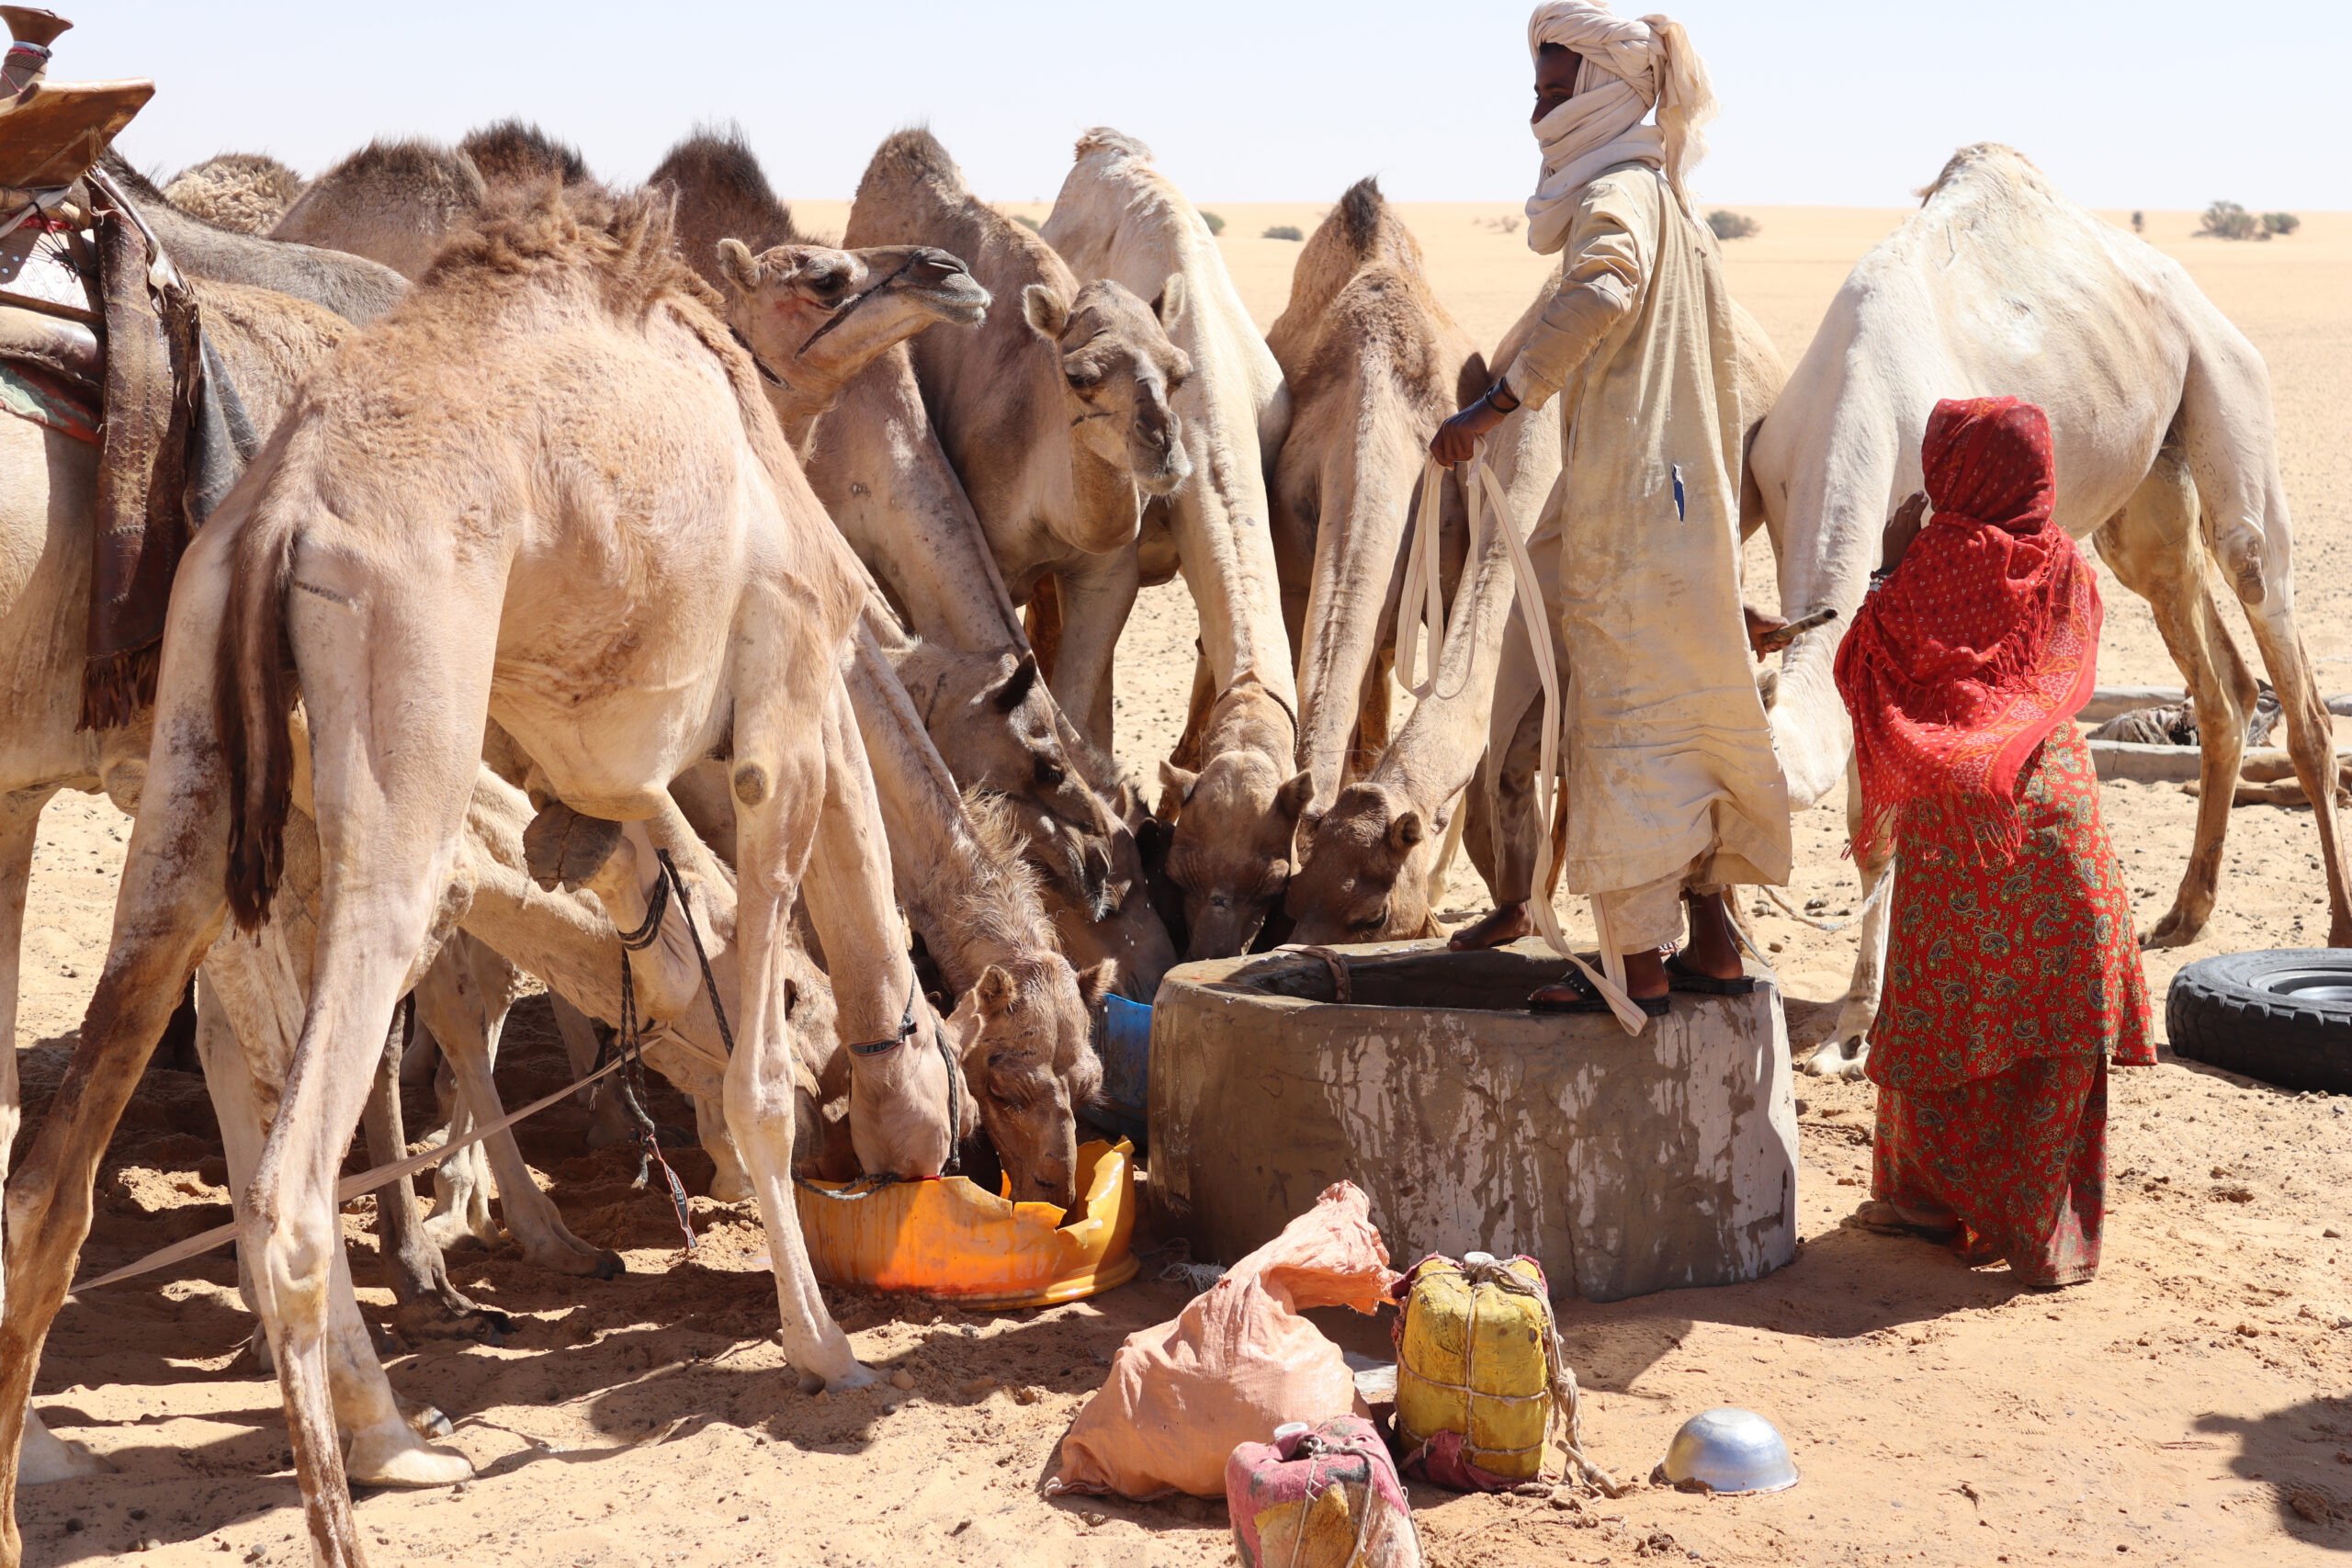 Camels drink water by a well in Sudan while two people look on